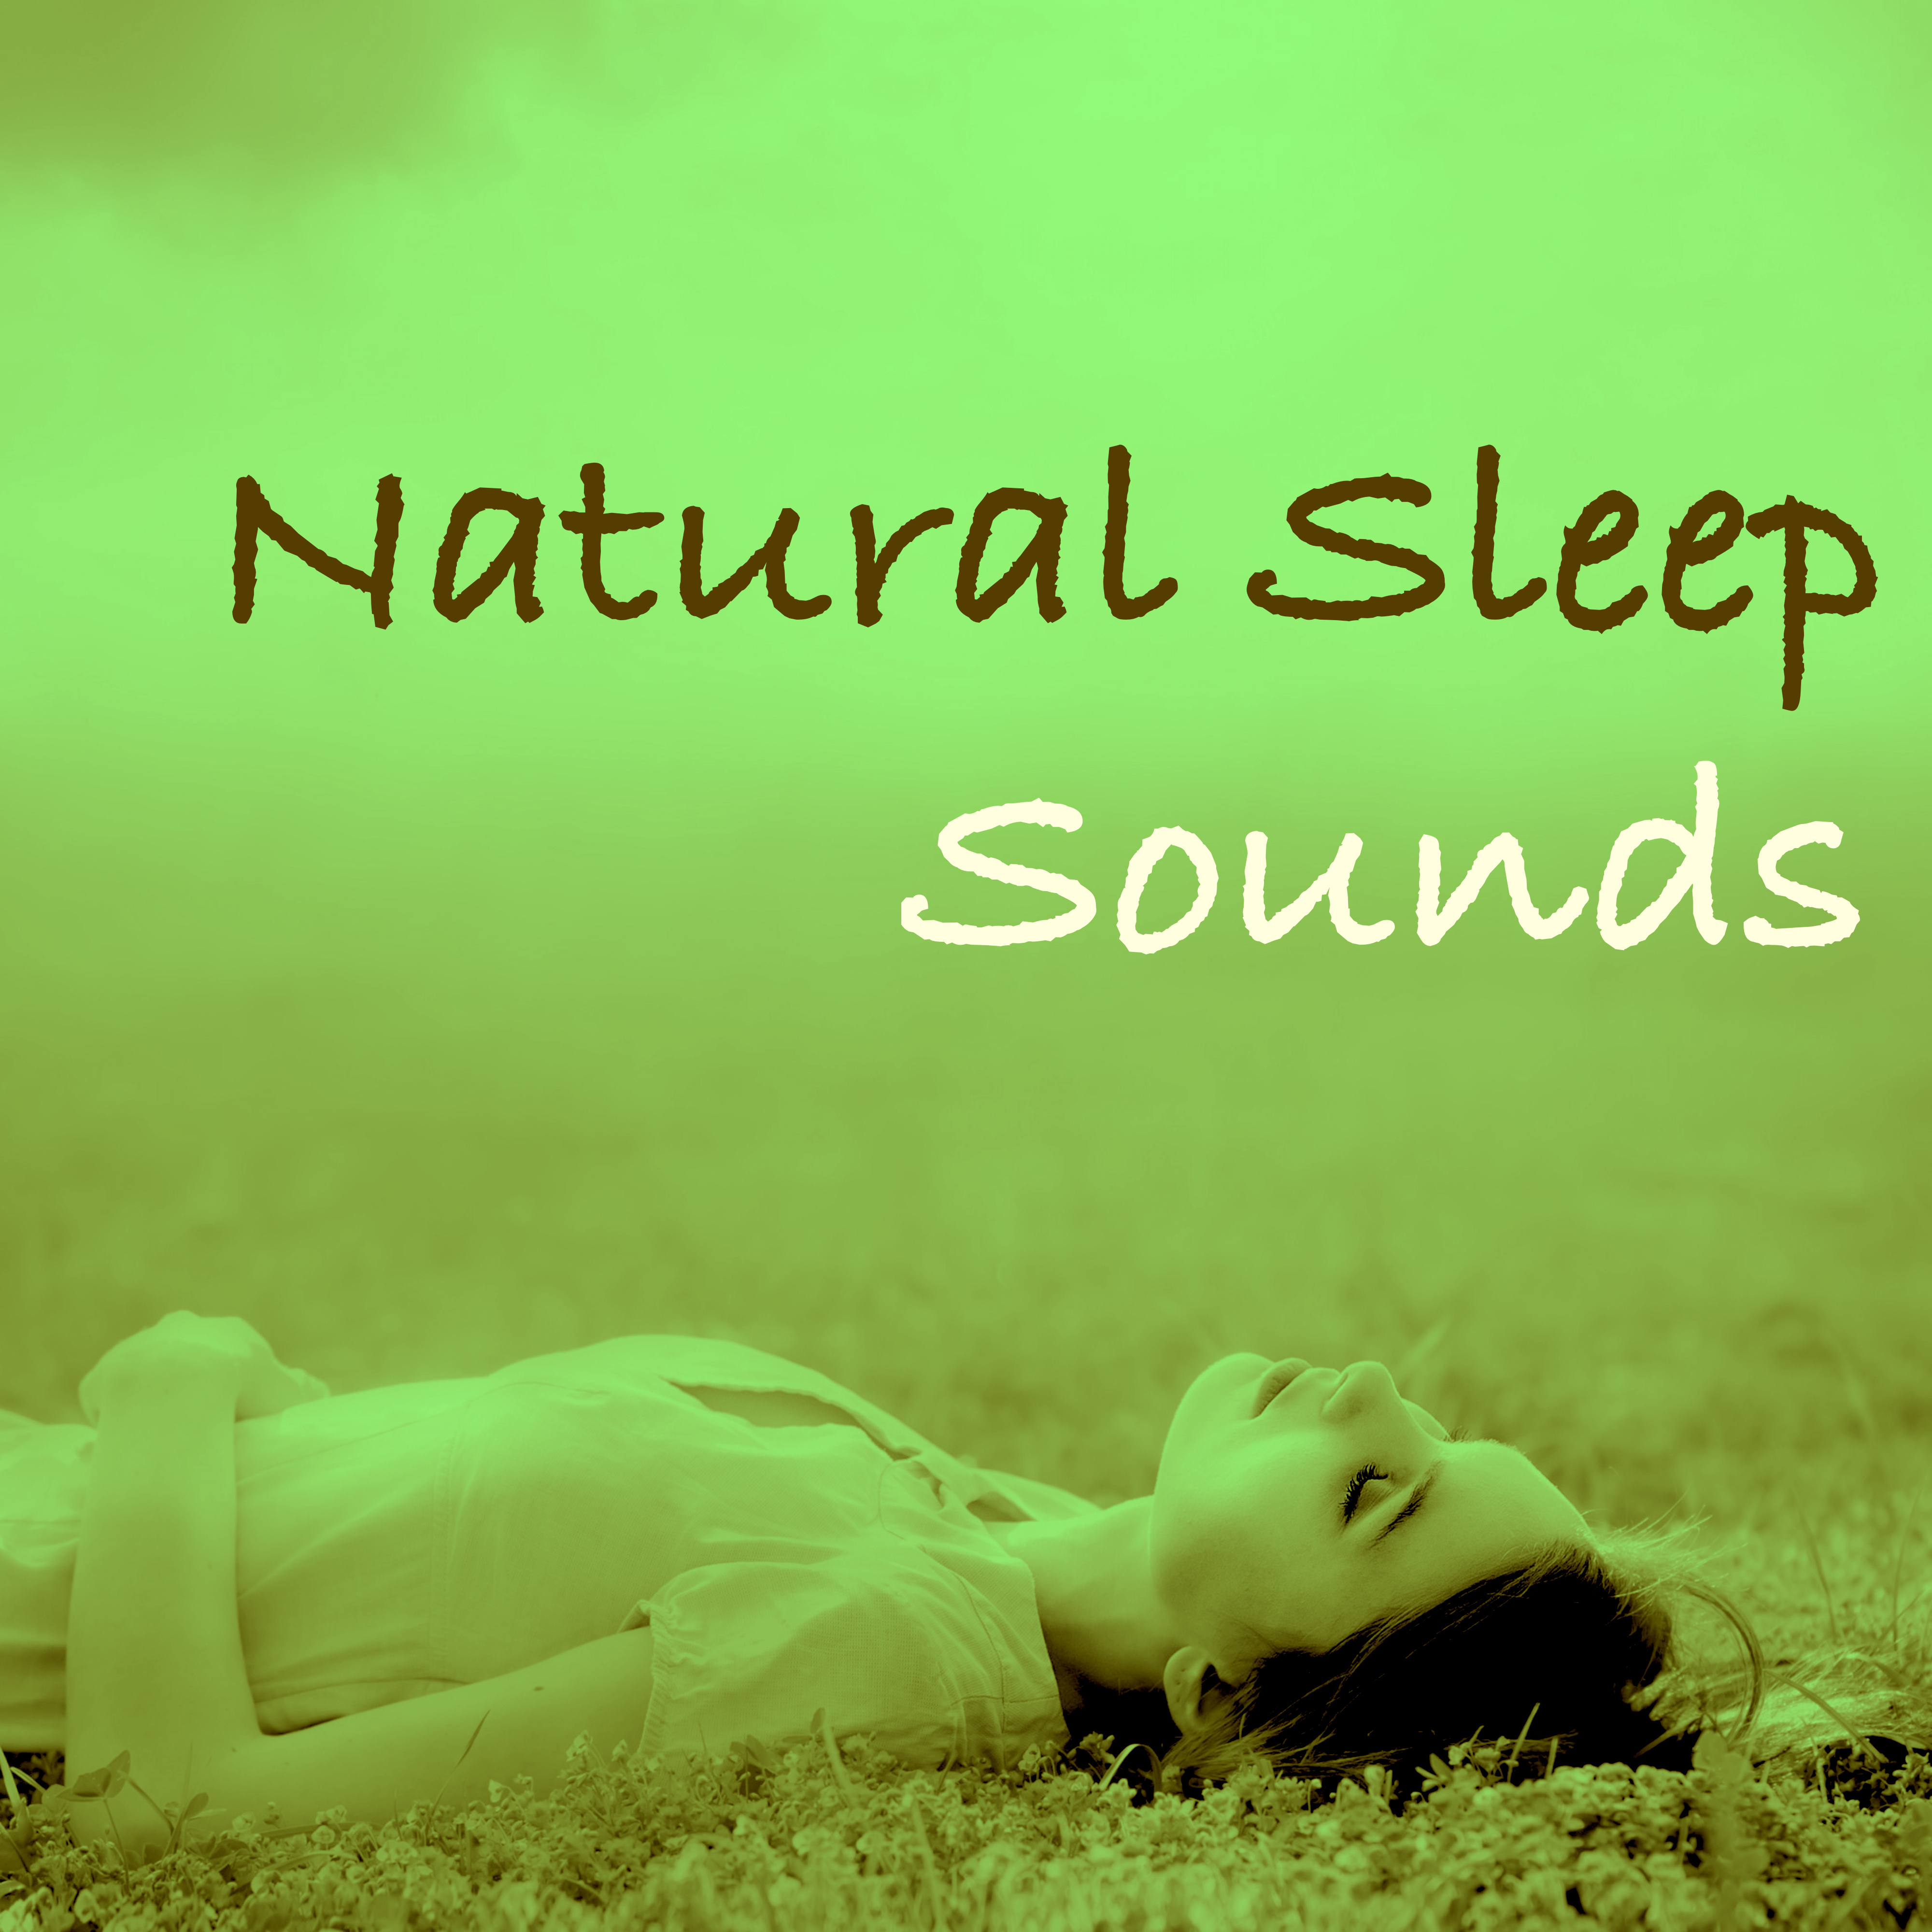 Natural Sleep Sounds: Playlist for Deep Sleep Meditation & Relaxation to Reduce Anxiety and Make Life Better